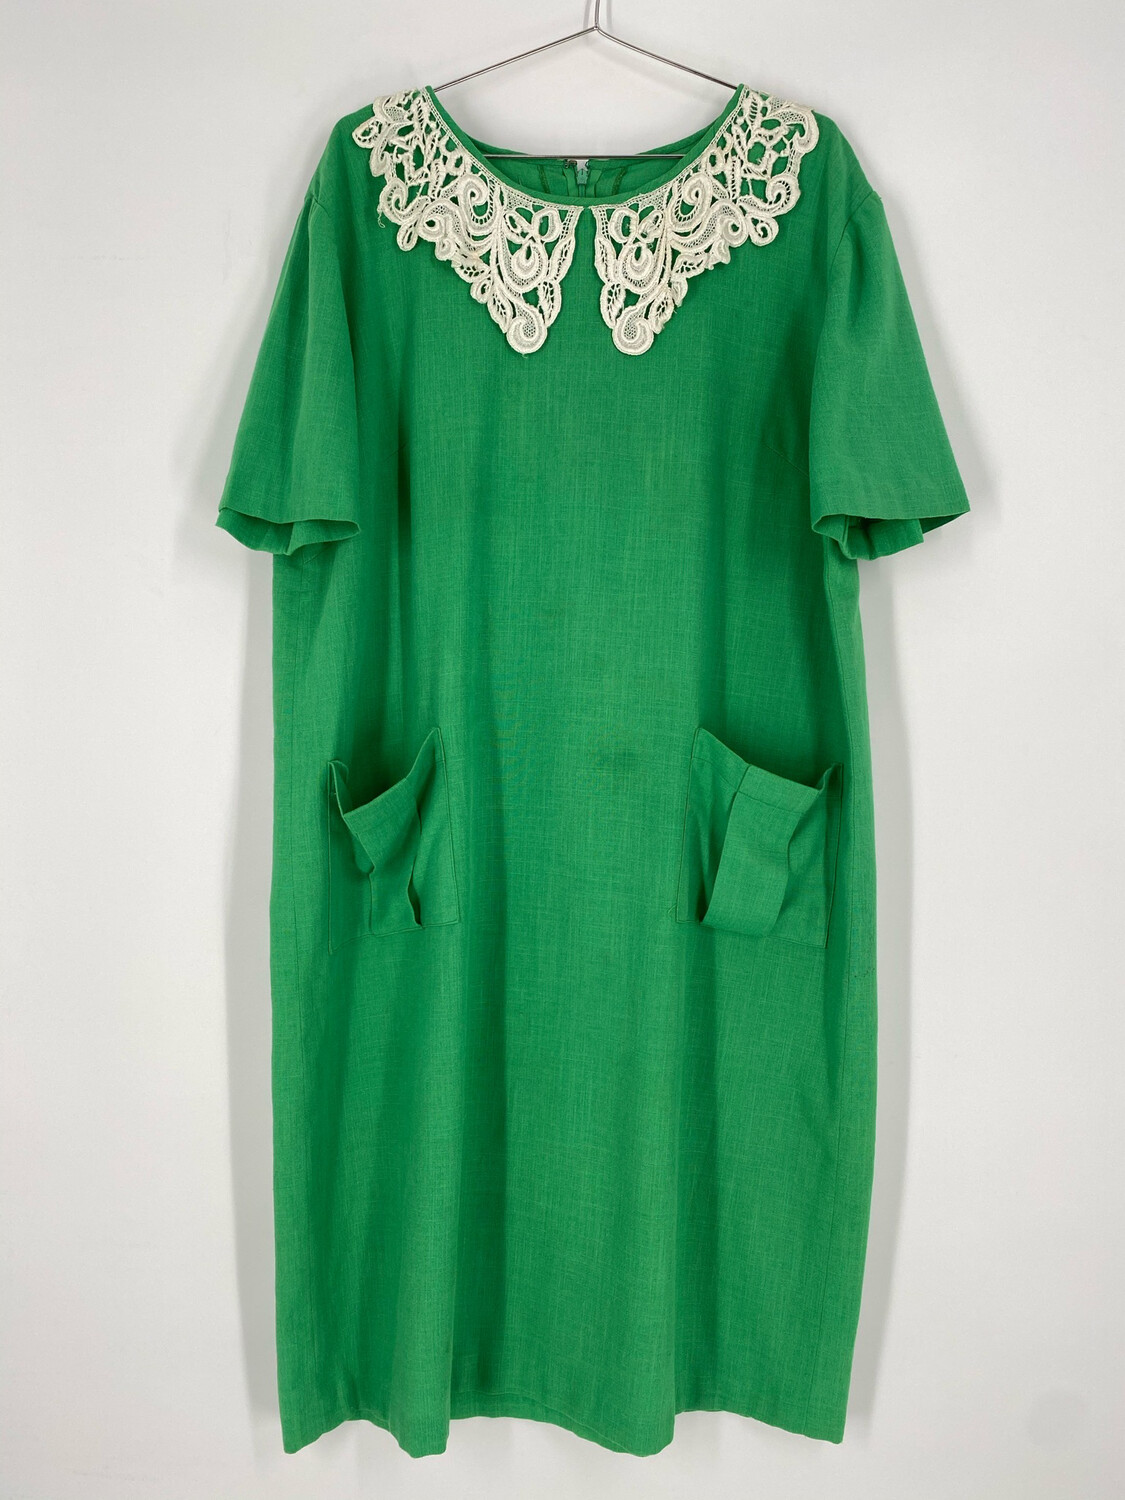 Vintage Short Sleeve Embroidered Green Dress Size 3X